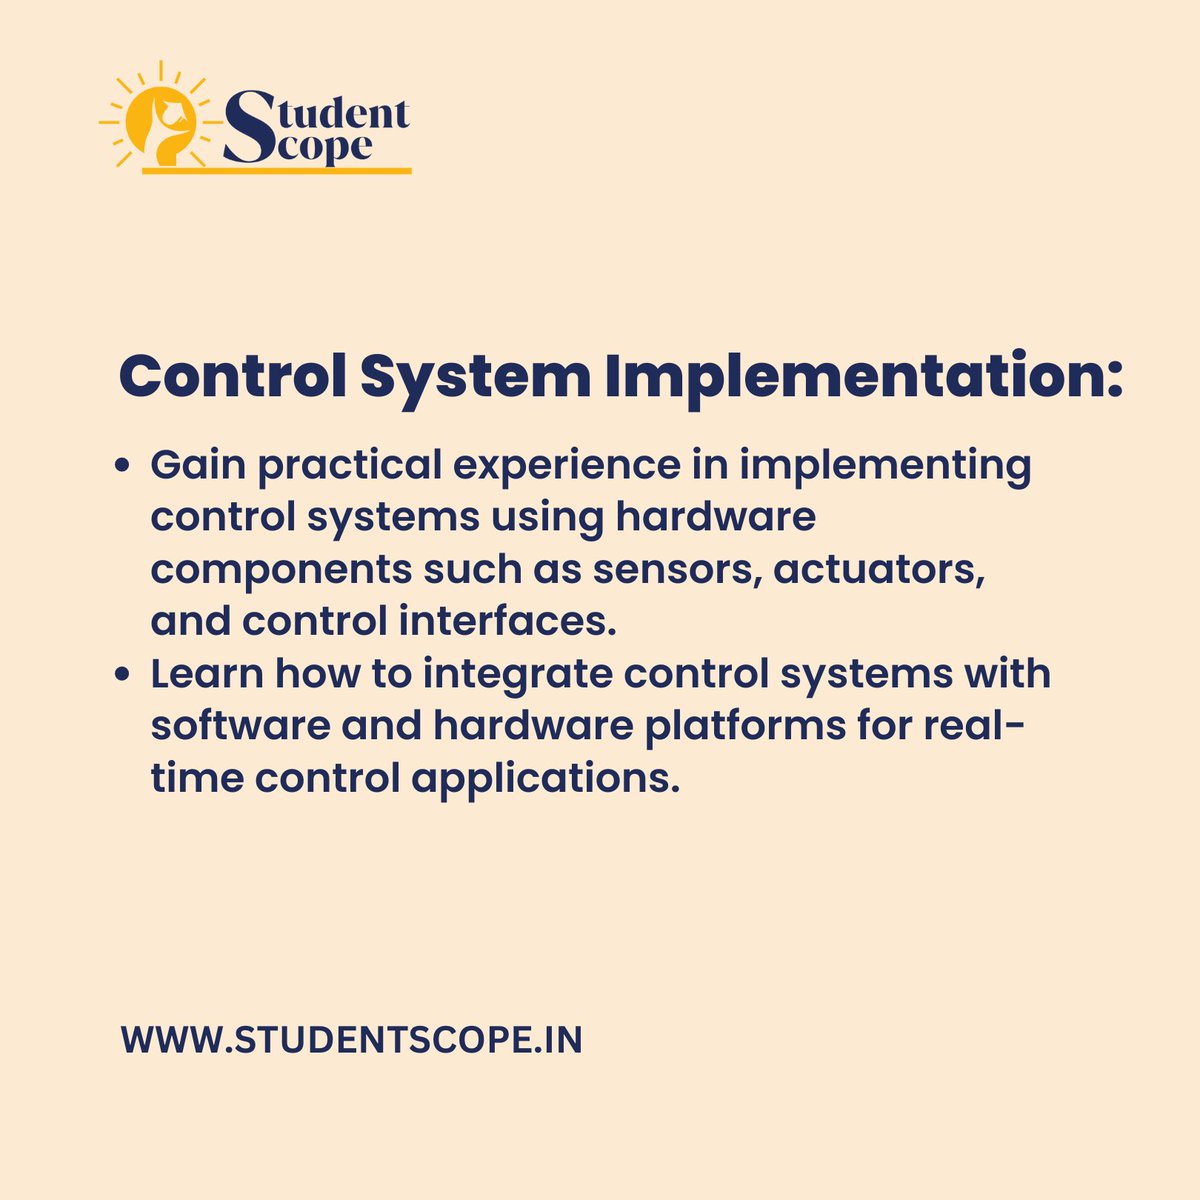 Mastering the Art of Control Systems Engineering: From Theory to Application 🛠️
Unlocking the potential of automation and innovation, one system at a time!

For more details visit studentscope.in

#StudentScope #Student #Scope #Engineering #ControlSystems